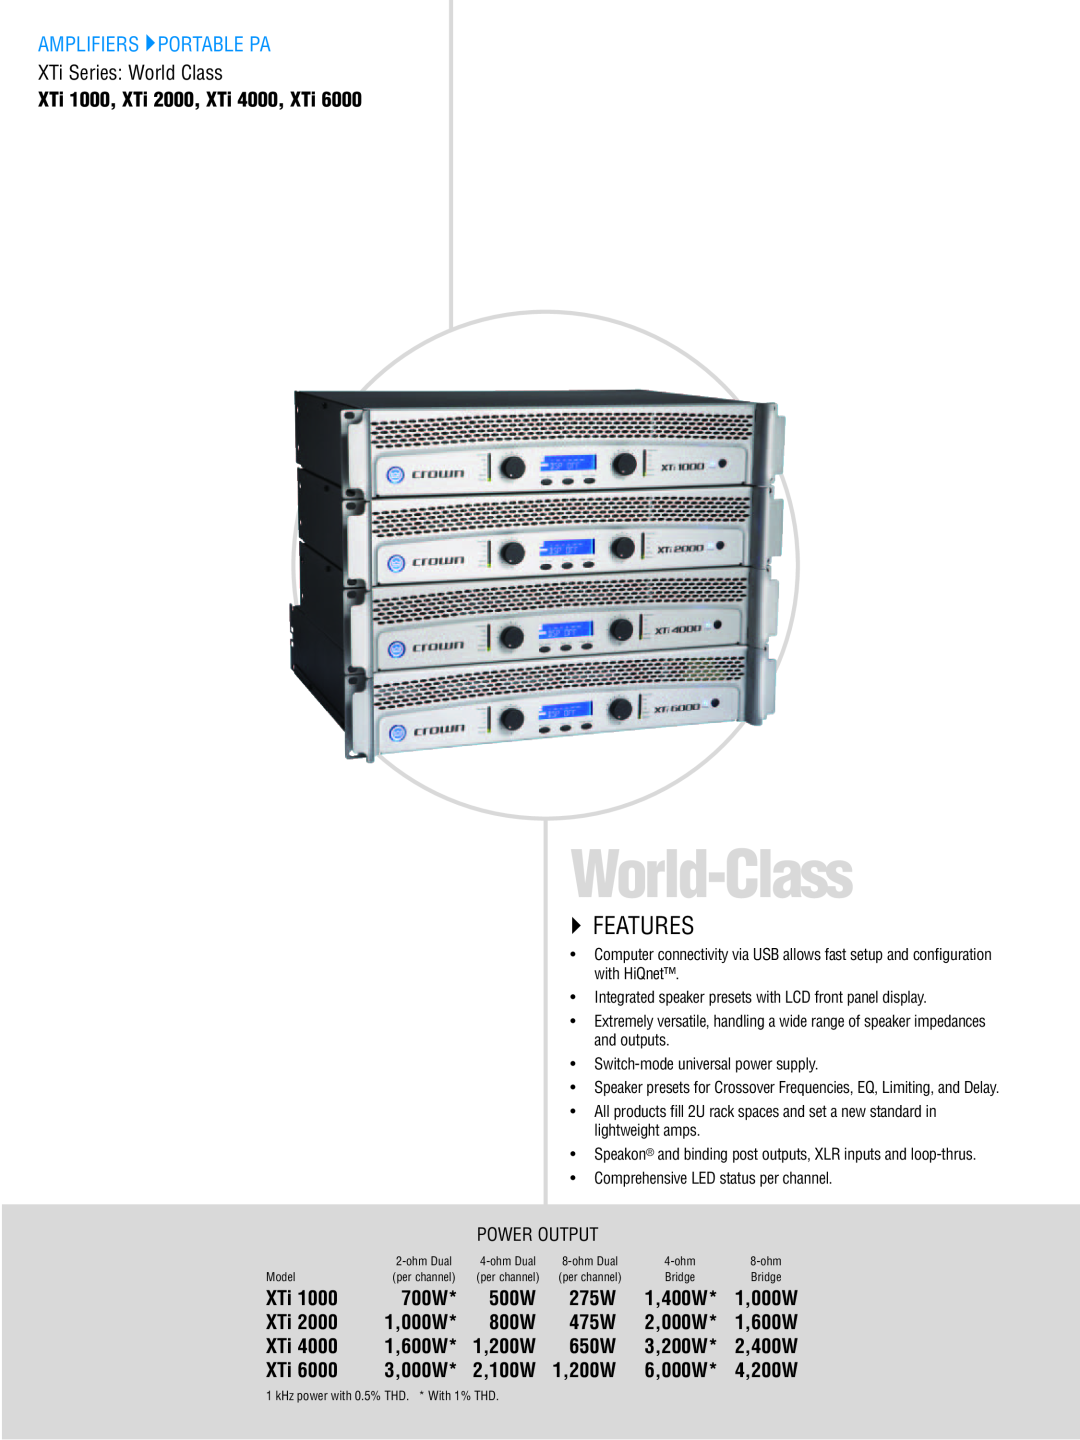 Crown CTS 3000, CTS 2000, CTS 1200, CTS 600 manual World-Class, Amplifiers Portable Pa, `` Features 